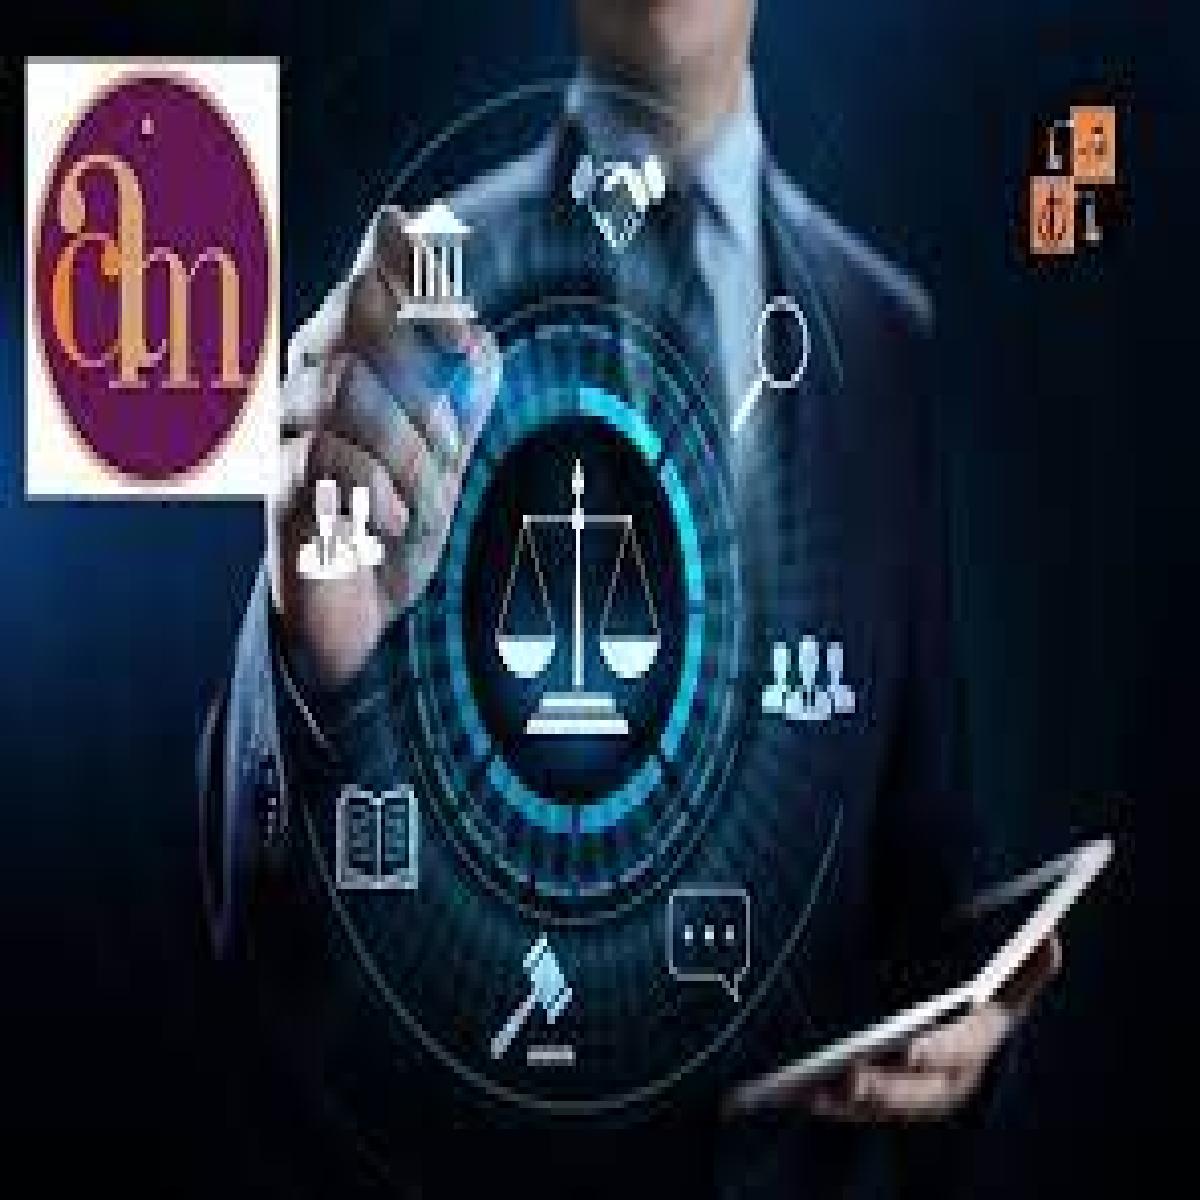 Cyril Amarchand Mangaldas to Promote LegalTech with the Launch of CLIC